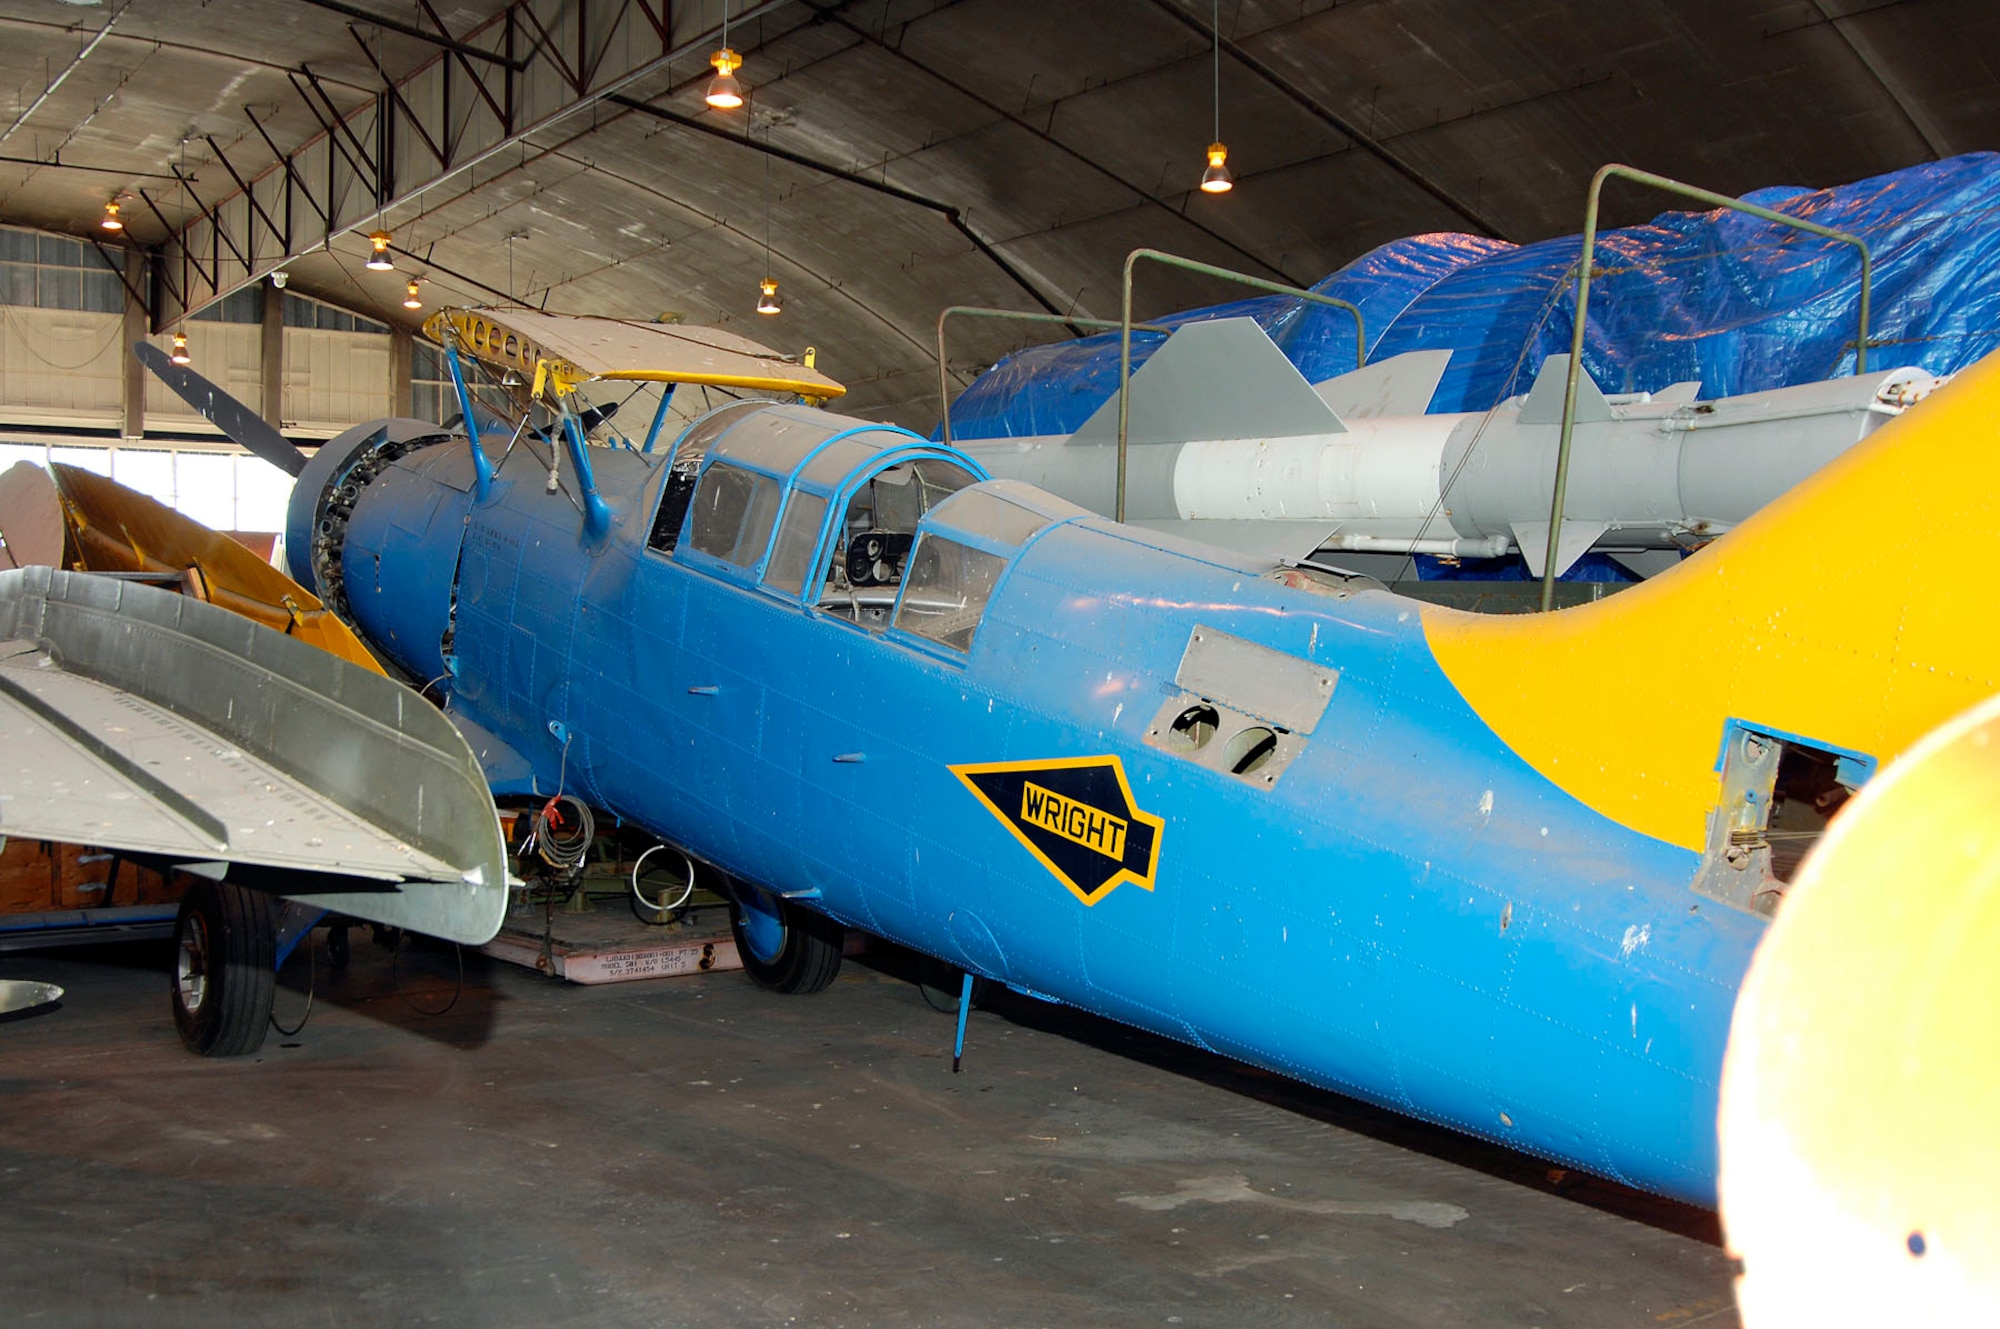 DAYTON, Ohio (02/2007) -- Douglas O-46A awaits restoration at the National Museum of the U.S. Air Force. (U.S. Air Force photo)